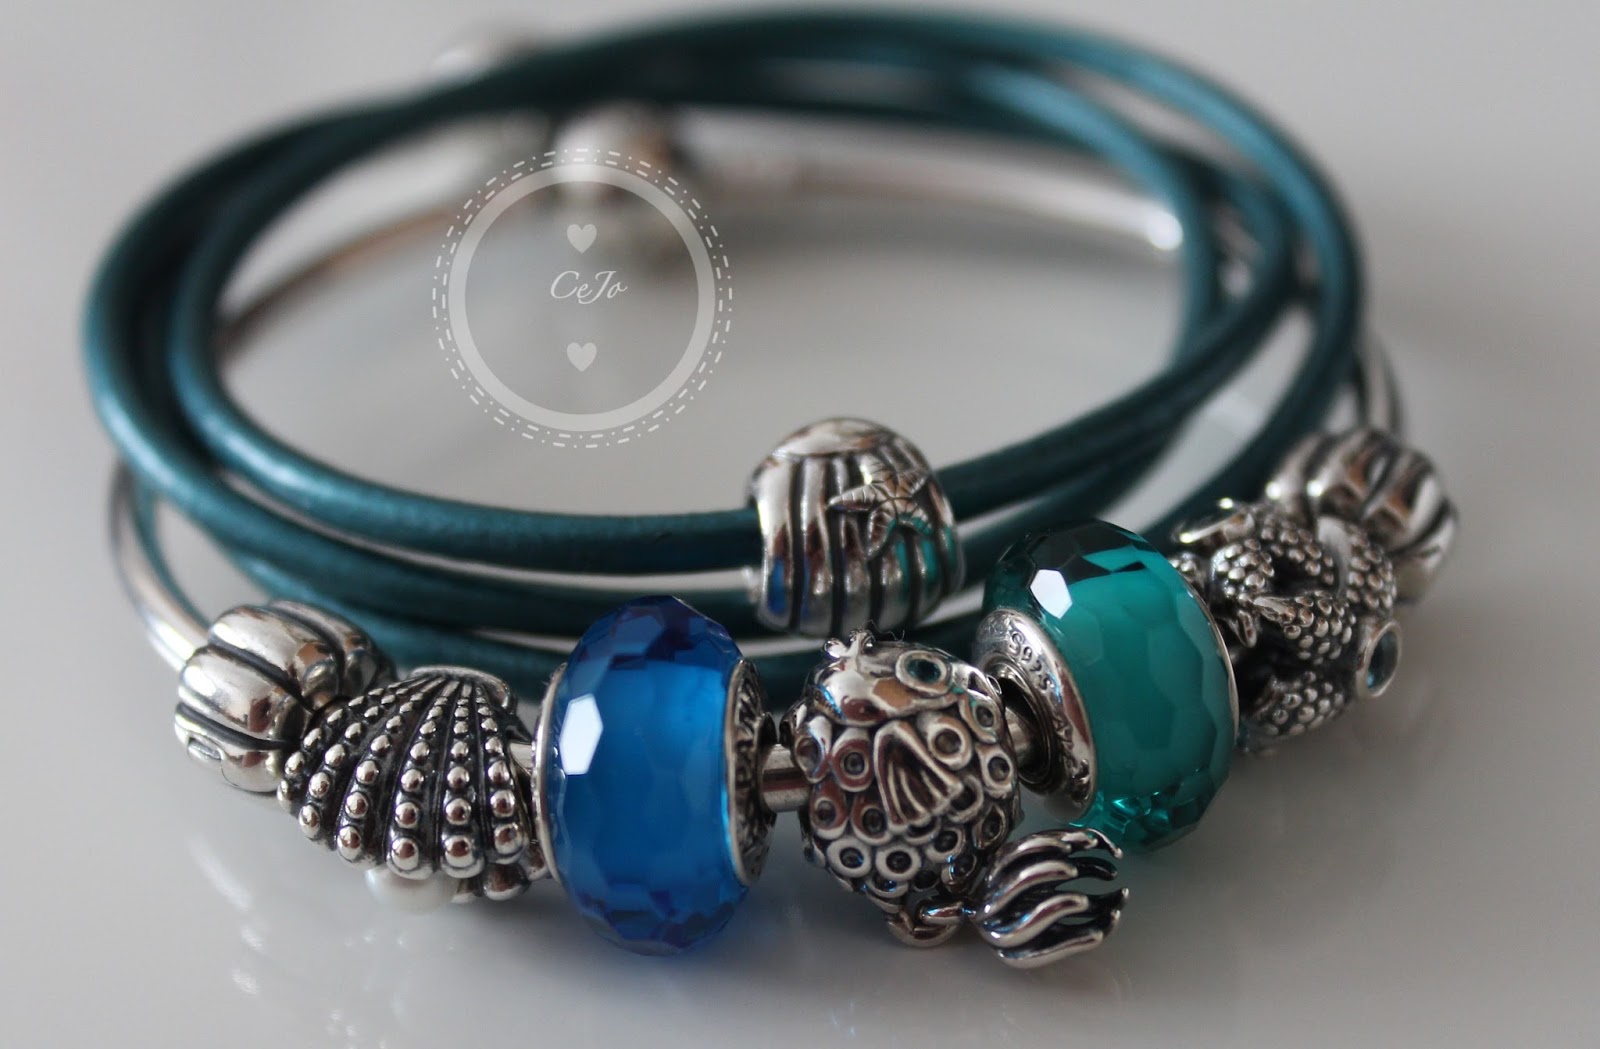 pandora summer stack with leather bracelet and bangle